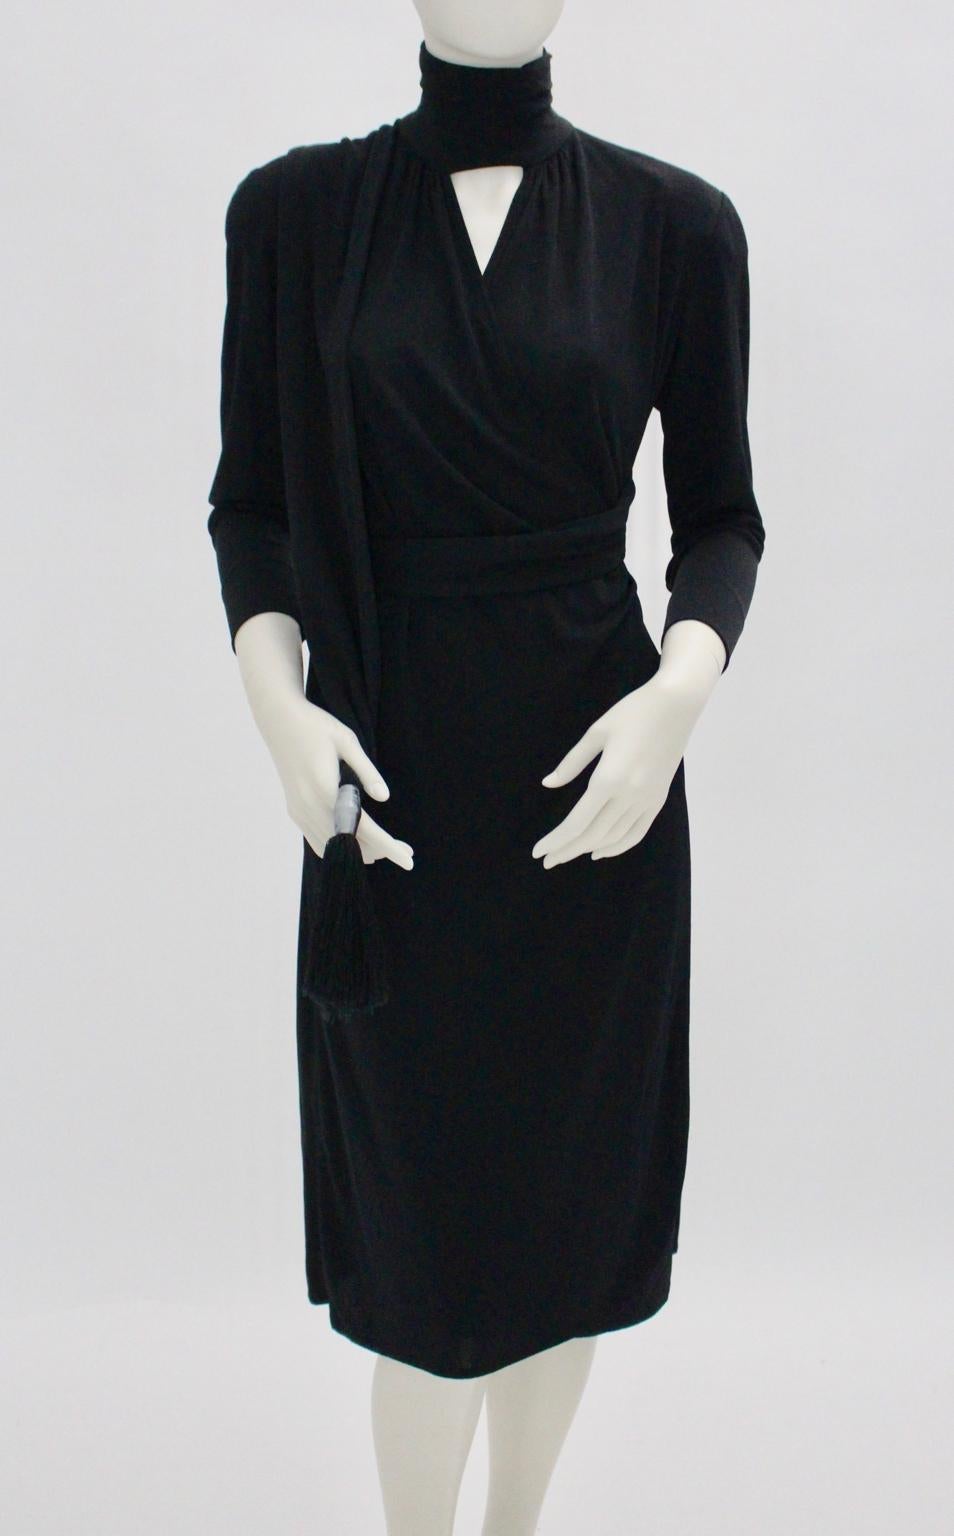 The black evening dress was designed and made in Italy in the 1970s.
This evening dress features many nice details:
3 buttons at the collar
Shoulder pads
Long sleeves with button detail

This wrap dress has buttons inside - adjustable - for the best